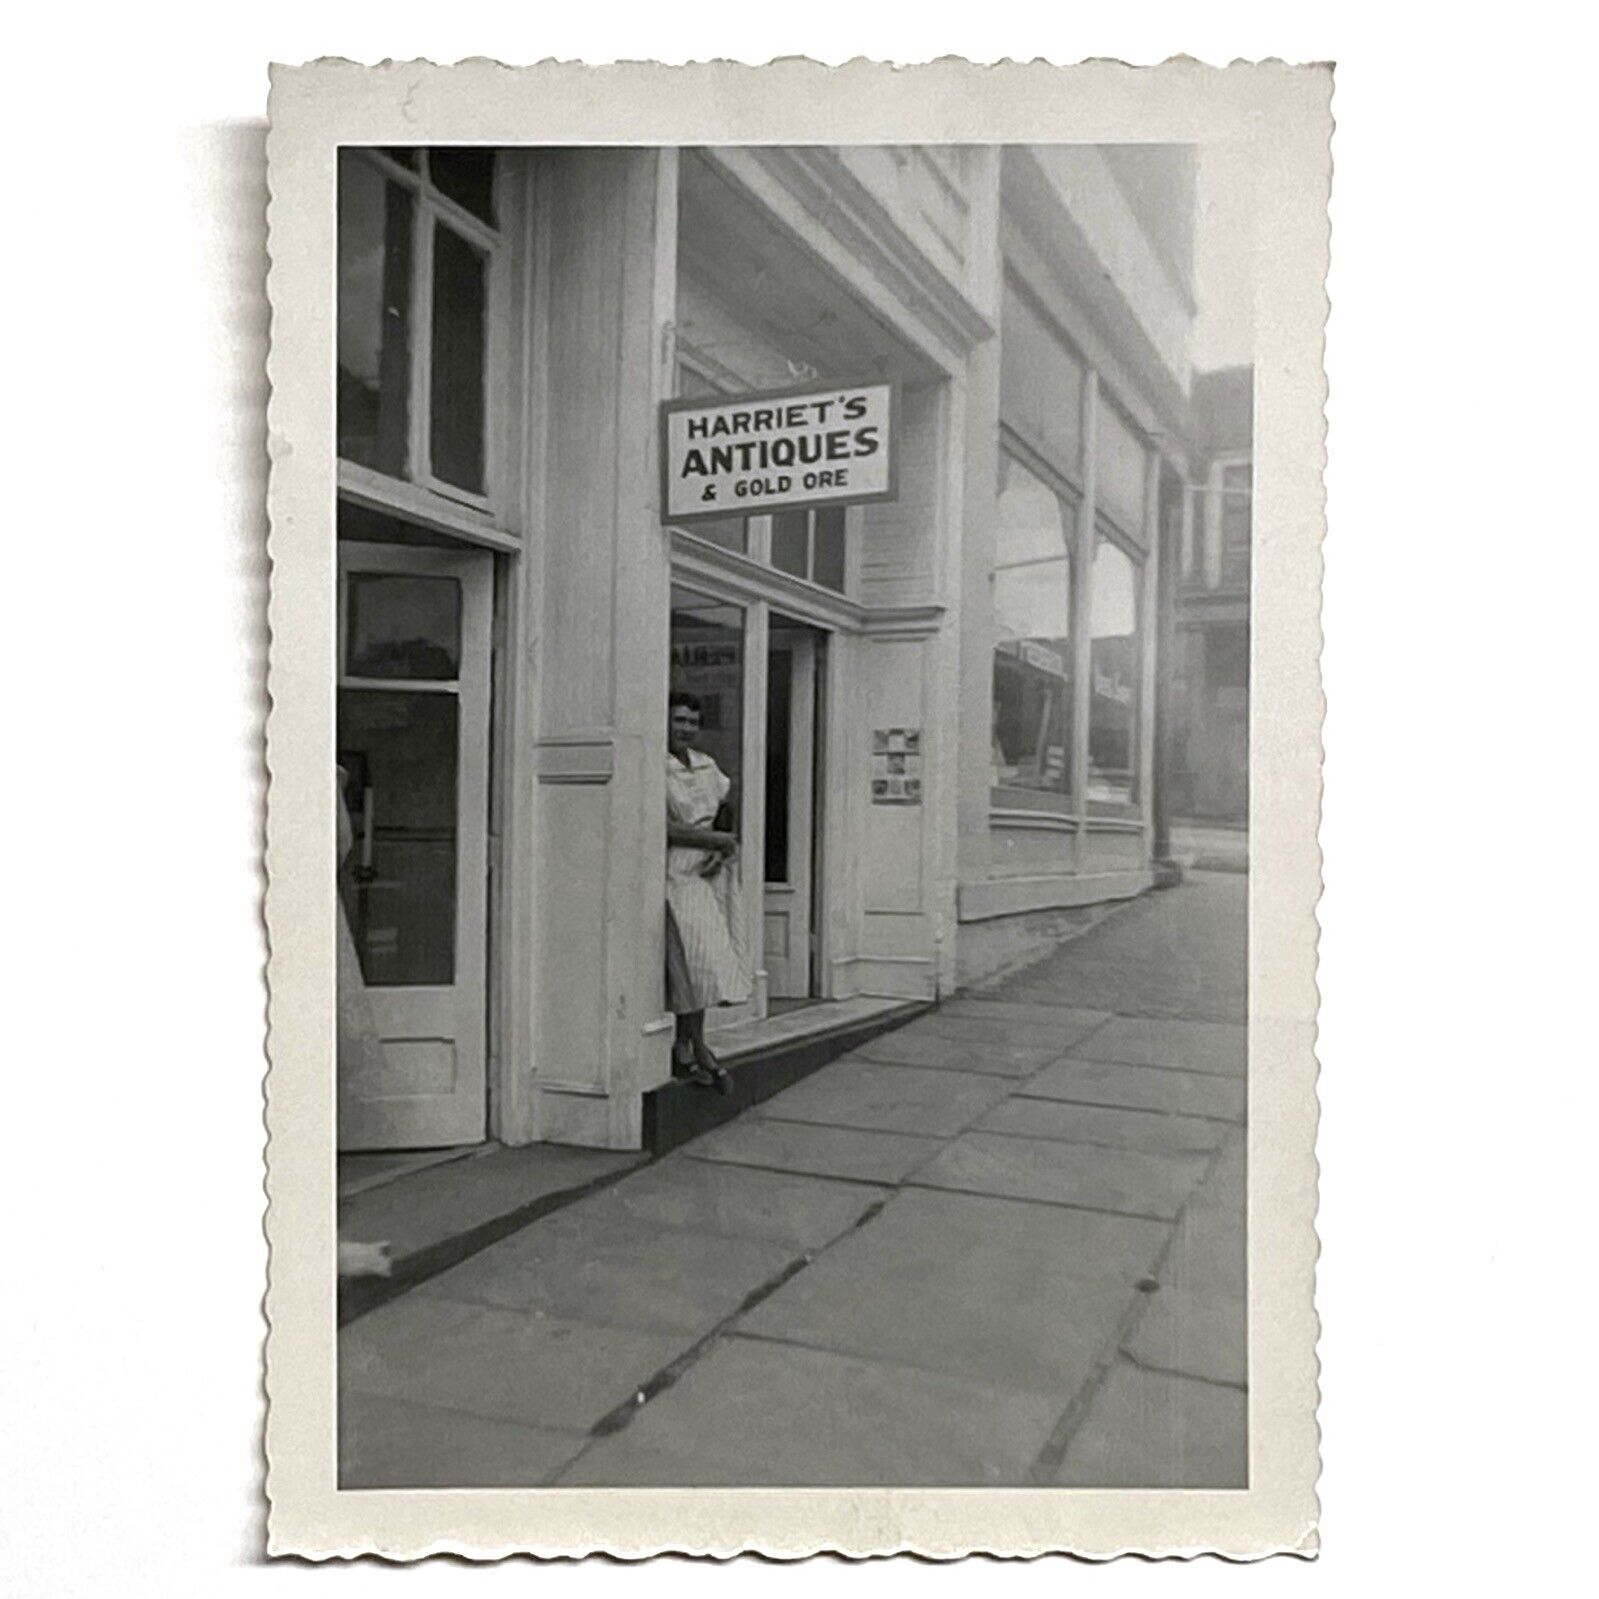 c1950’s Photo of Harriet’s Antiques and Gold Ore Shop • Cripple Creek Colorado 